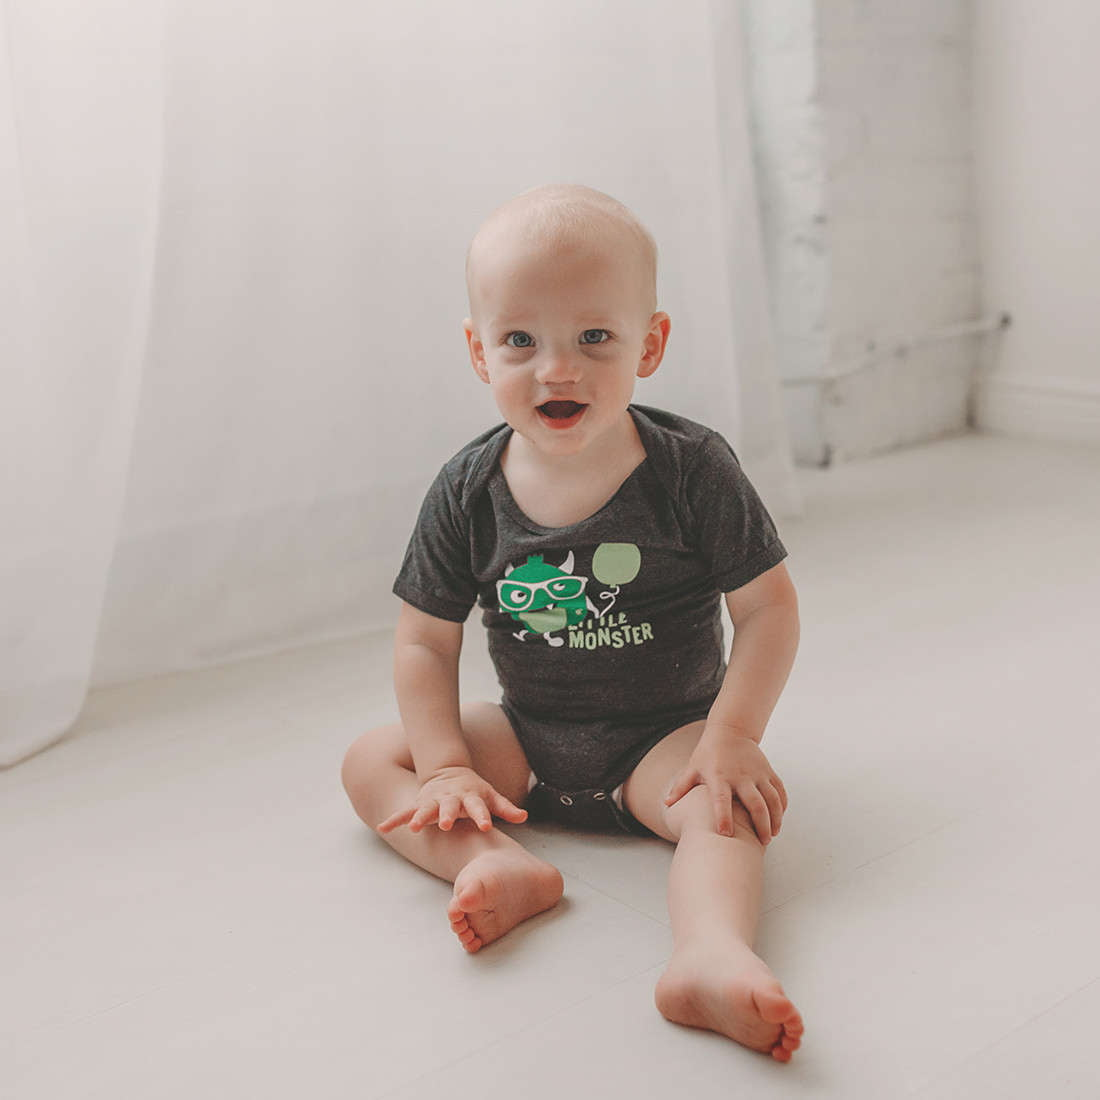 Little Monster baby bodysuit - Sweetpea and Co.